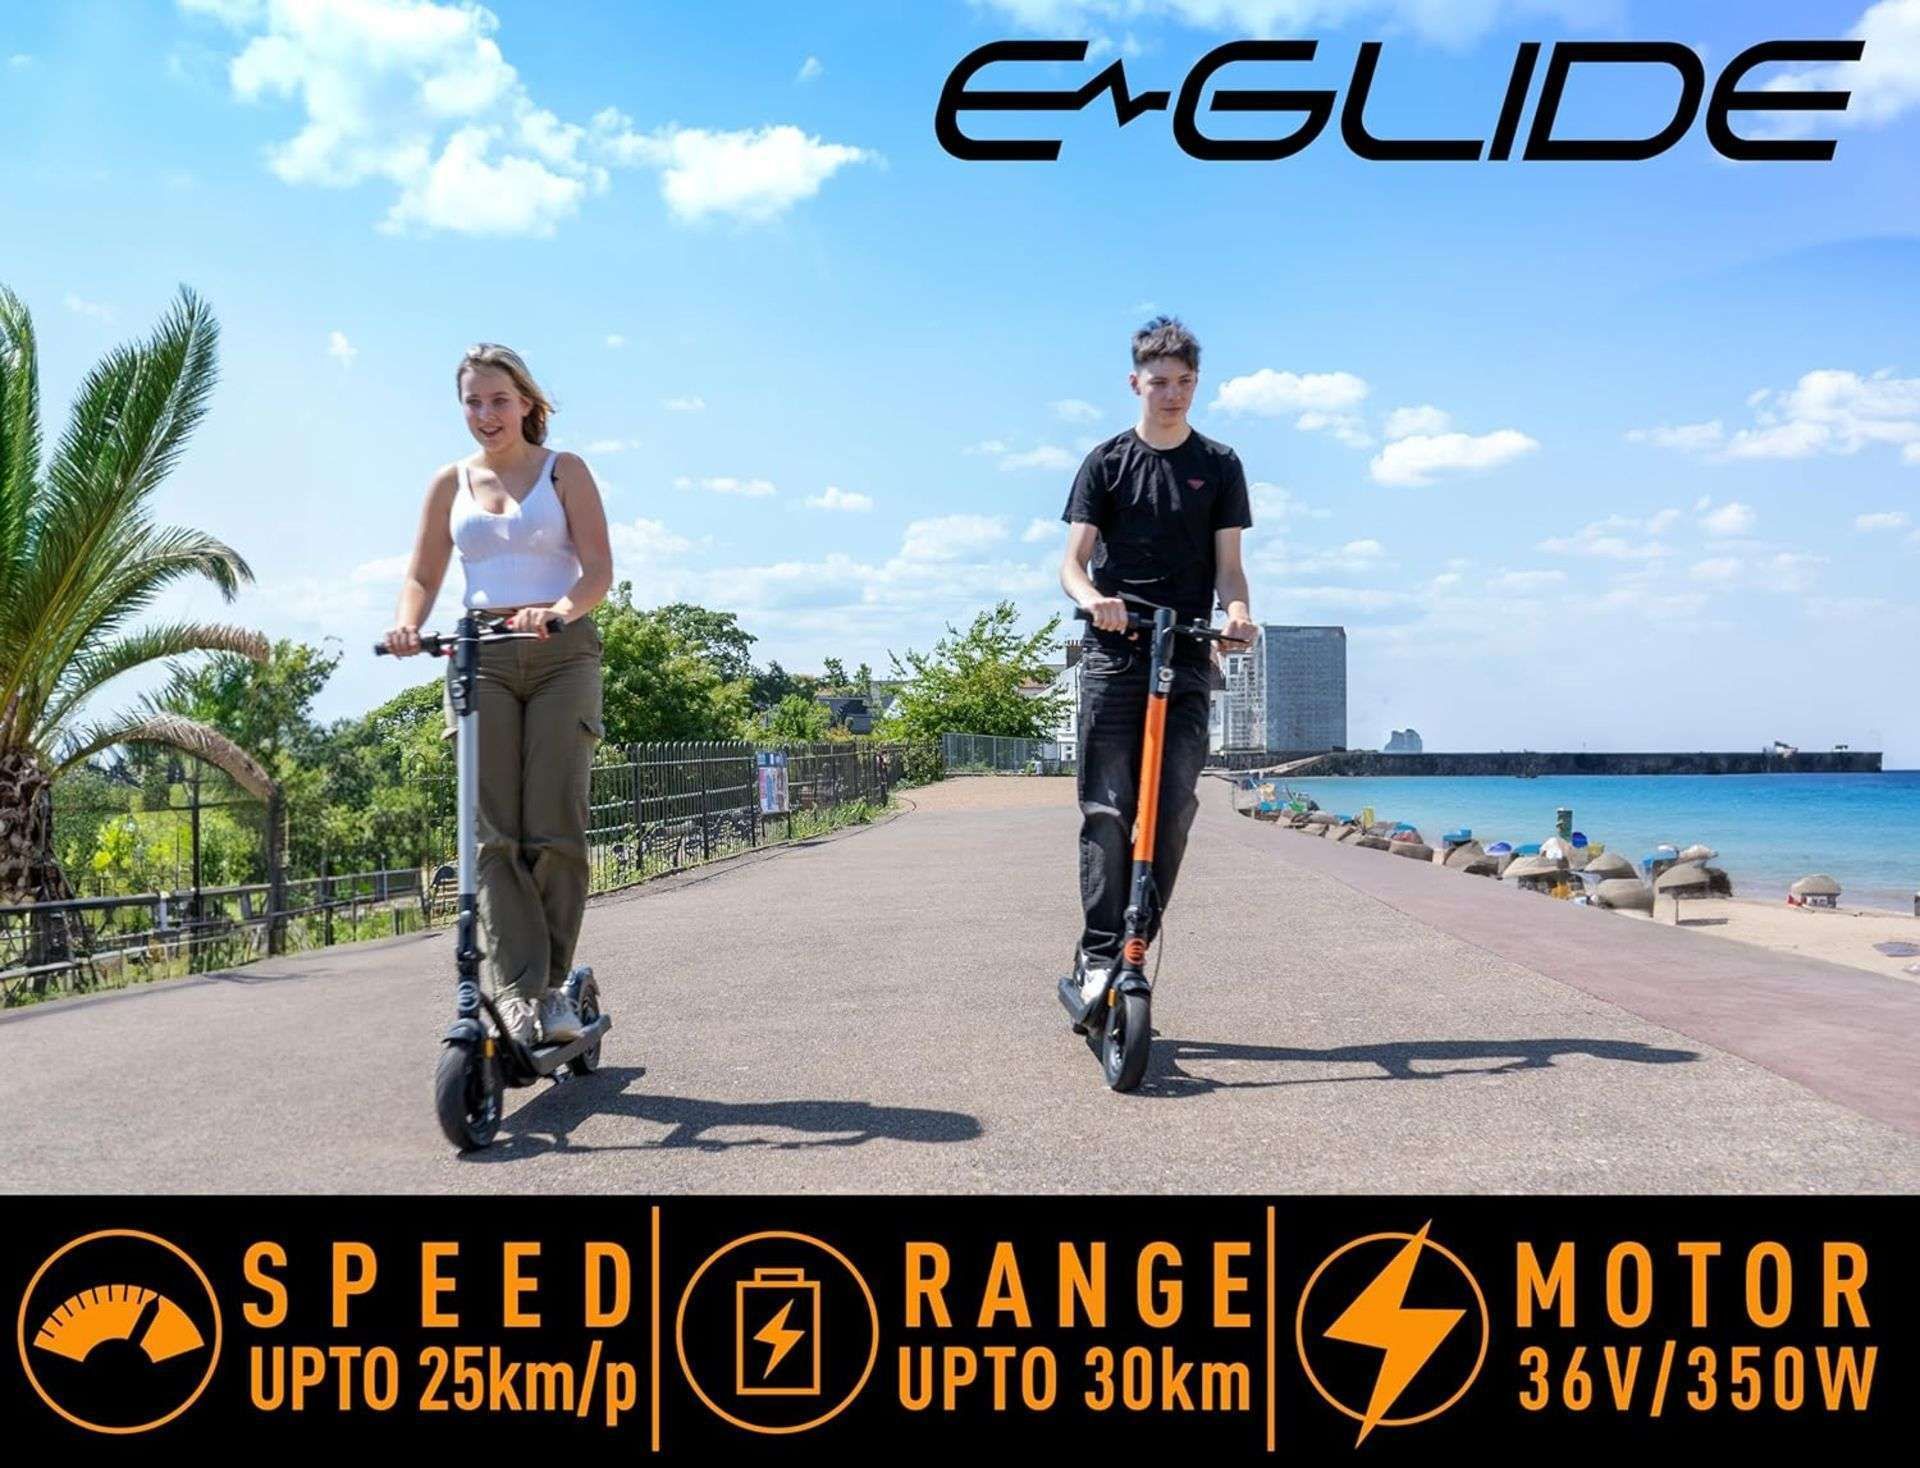 Brand New E-Glide V2 Electric Scooter Orange and Black RRP £599, Introducing a sleek and efficient - Image 3 of 5